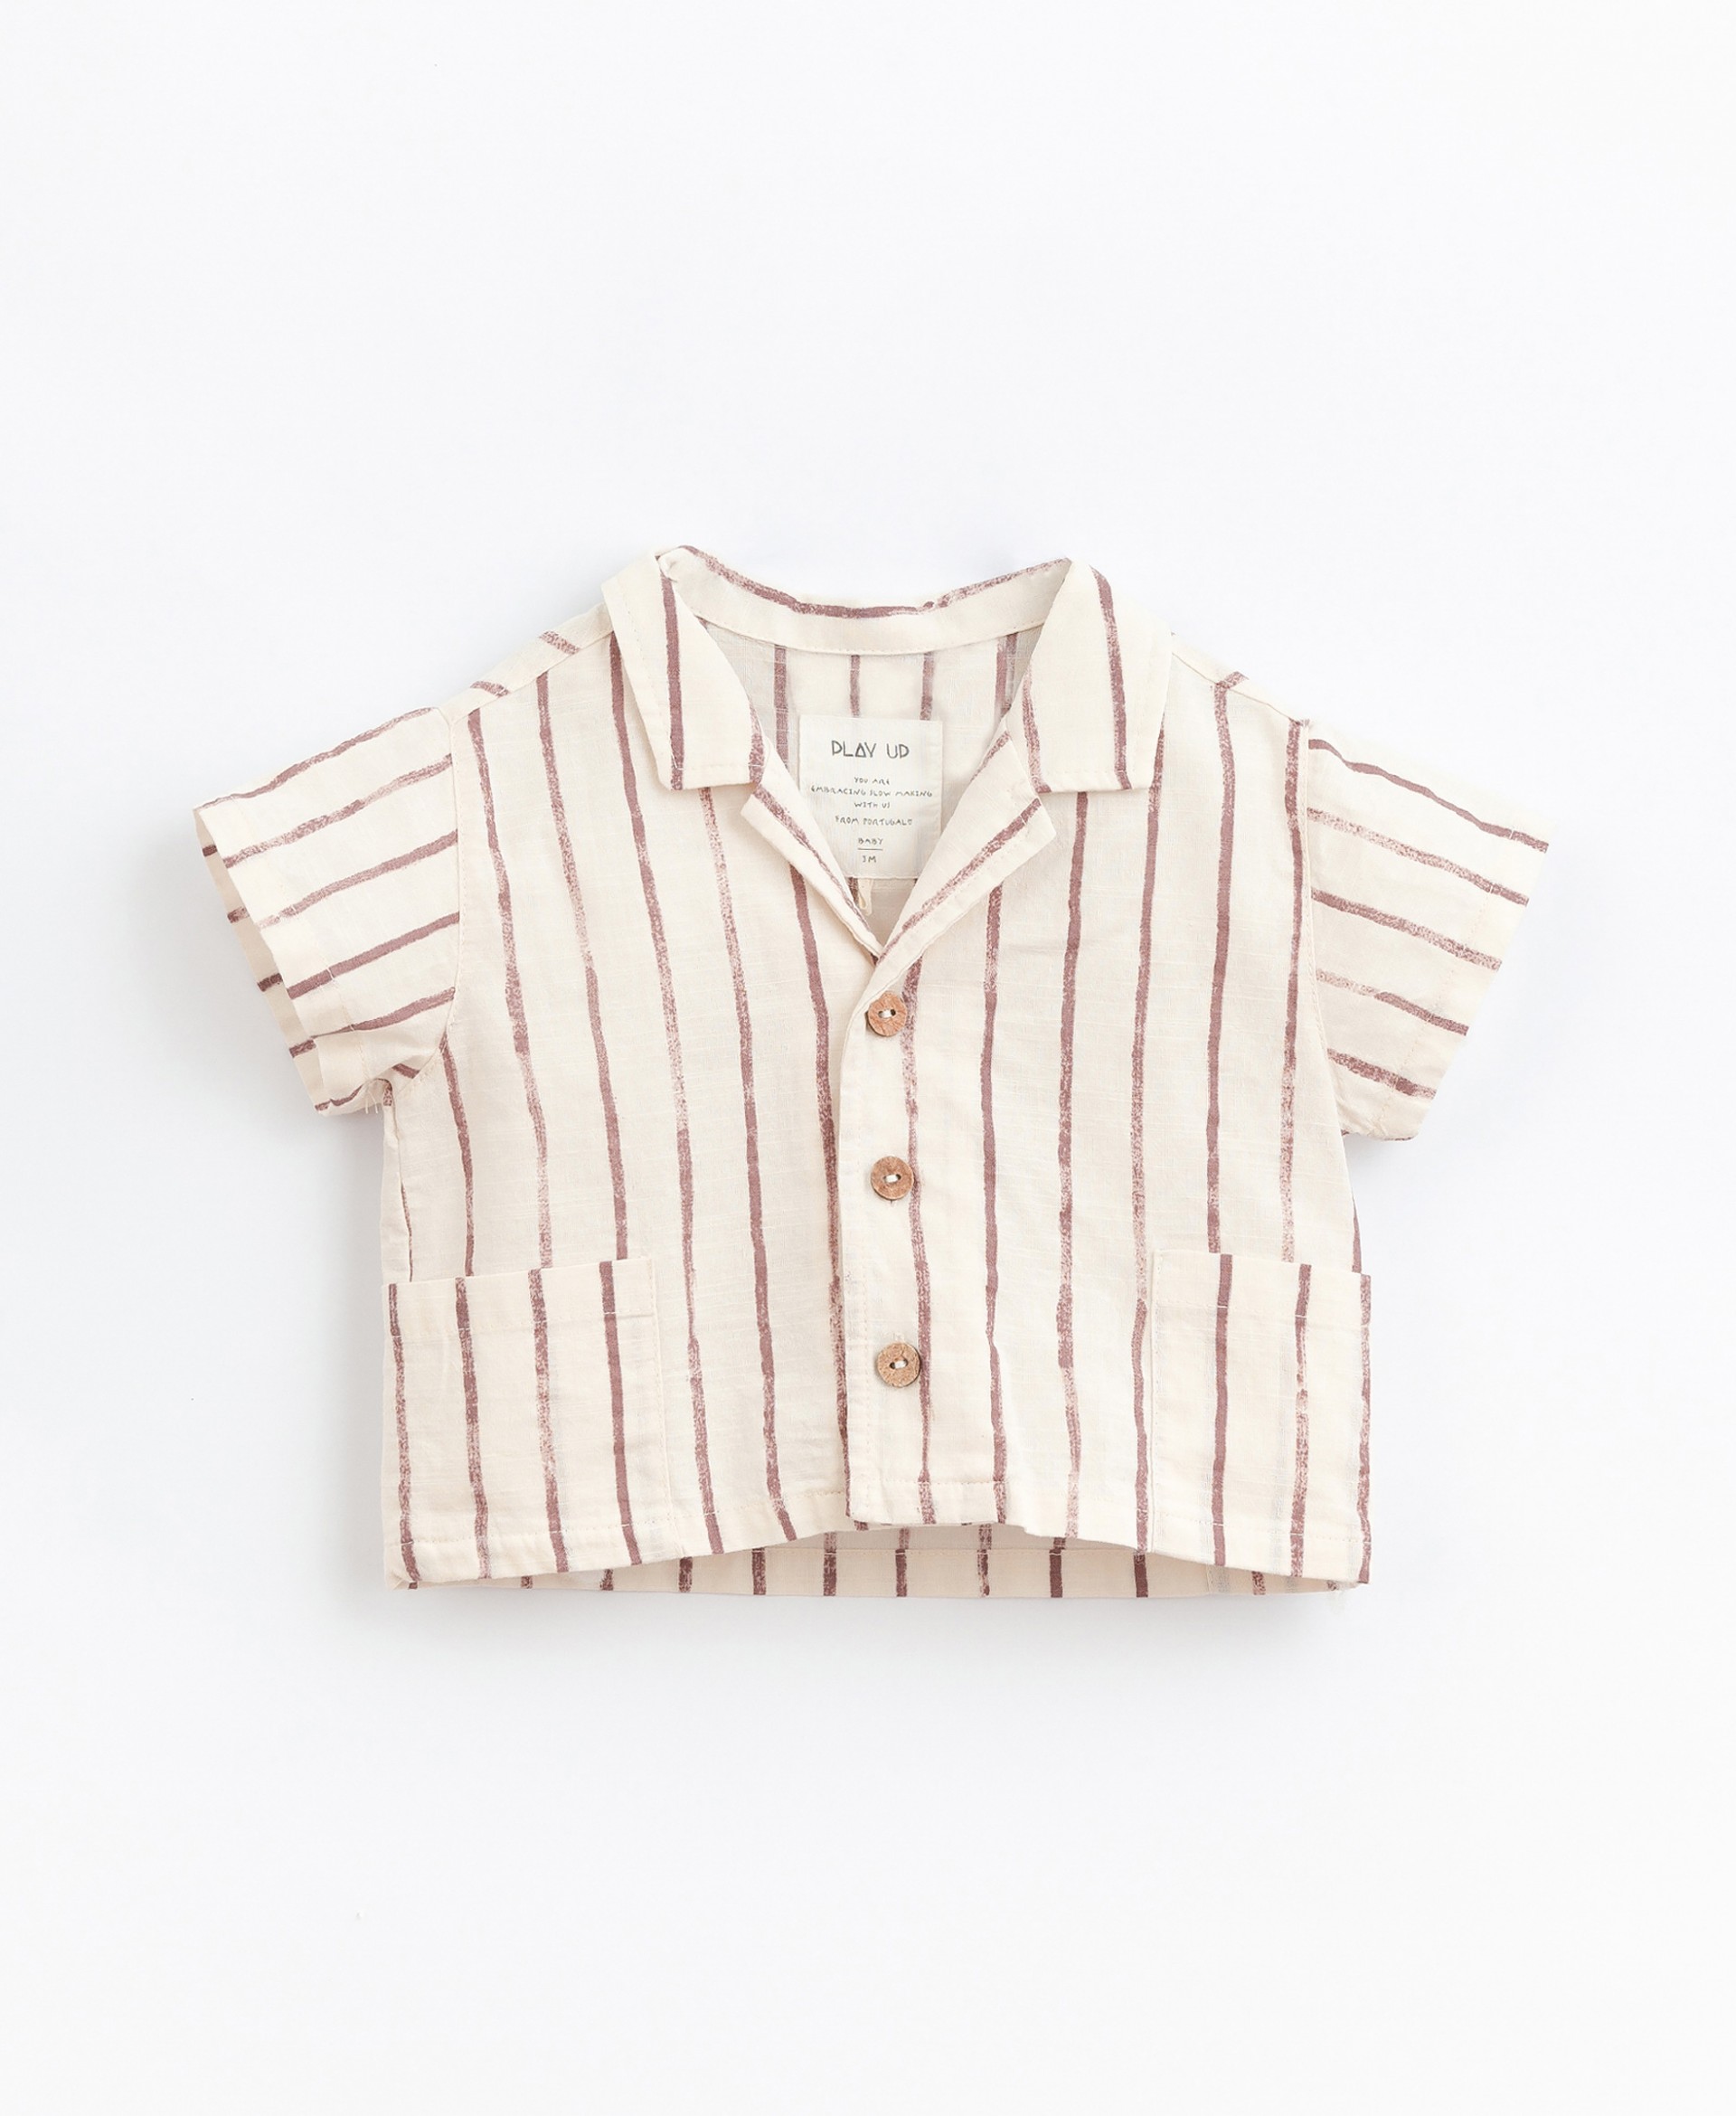 Striped shirt with pockets | Basketry